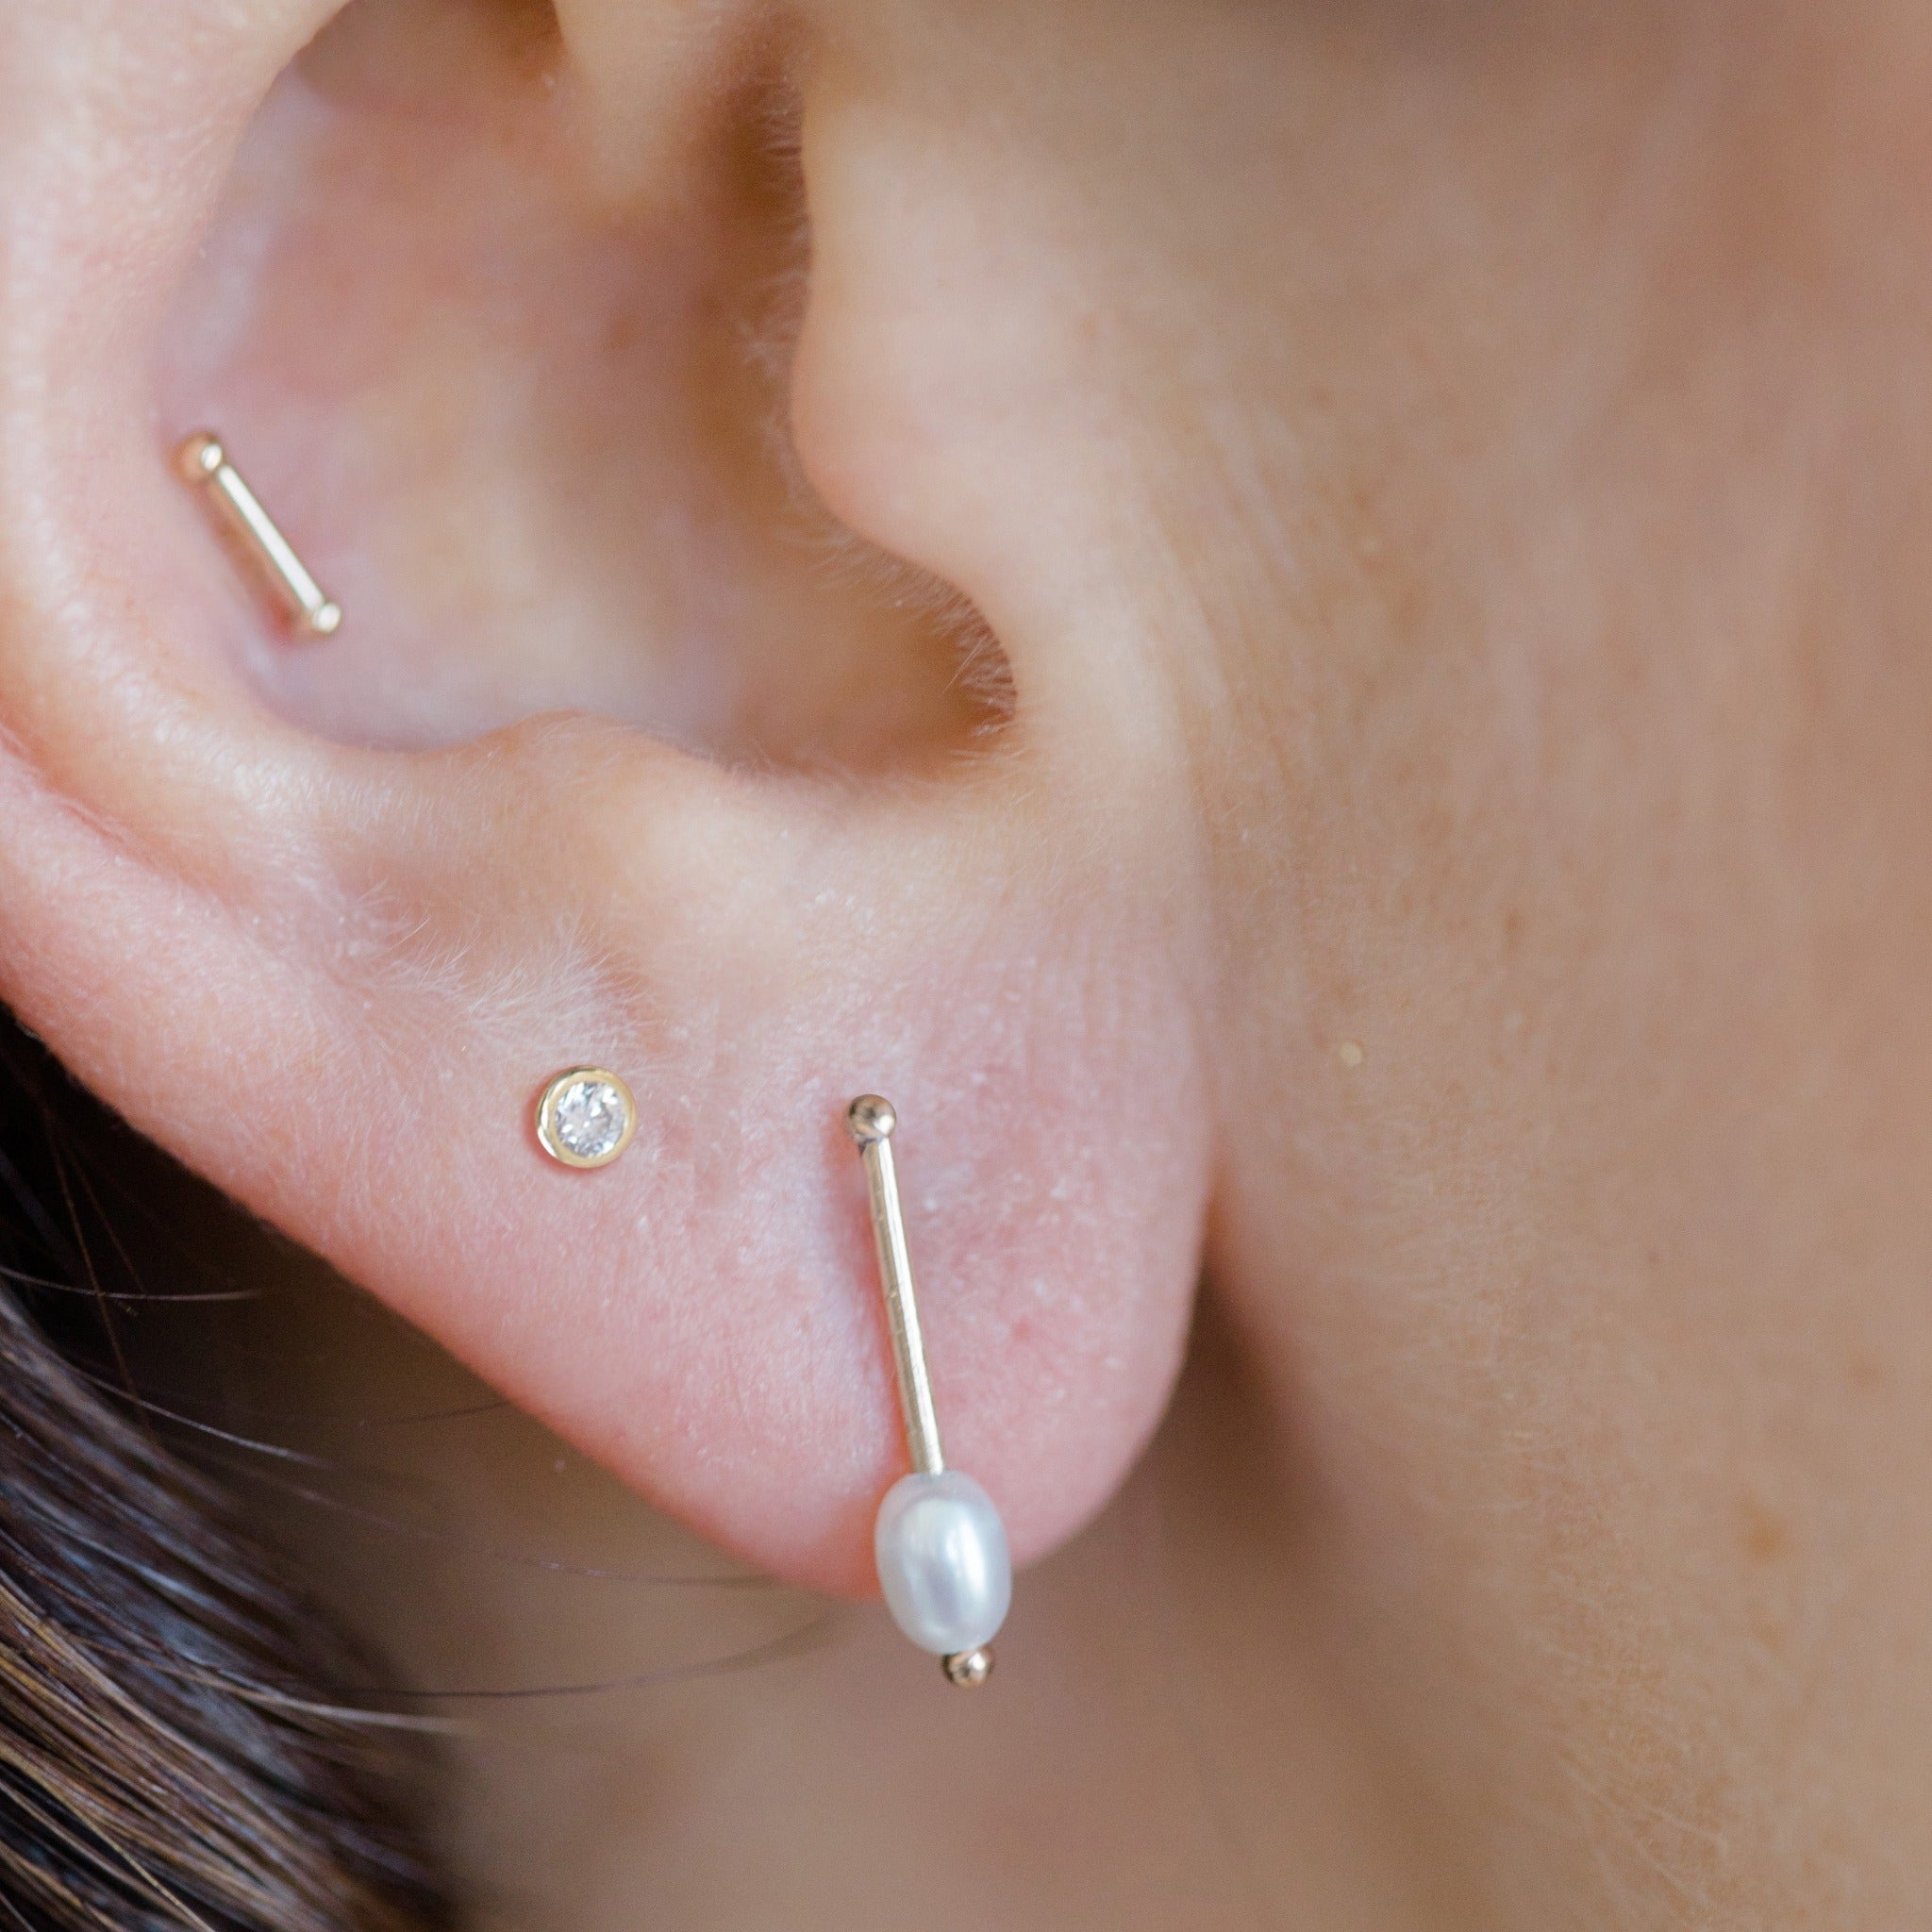 Combine this stud earring with other solid gold favorites for a well curated stylish ear.